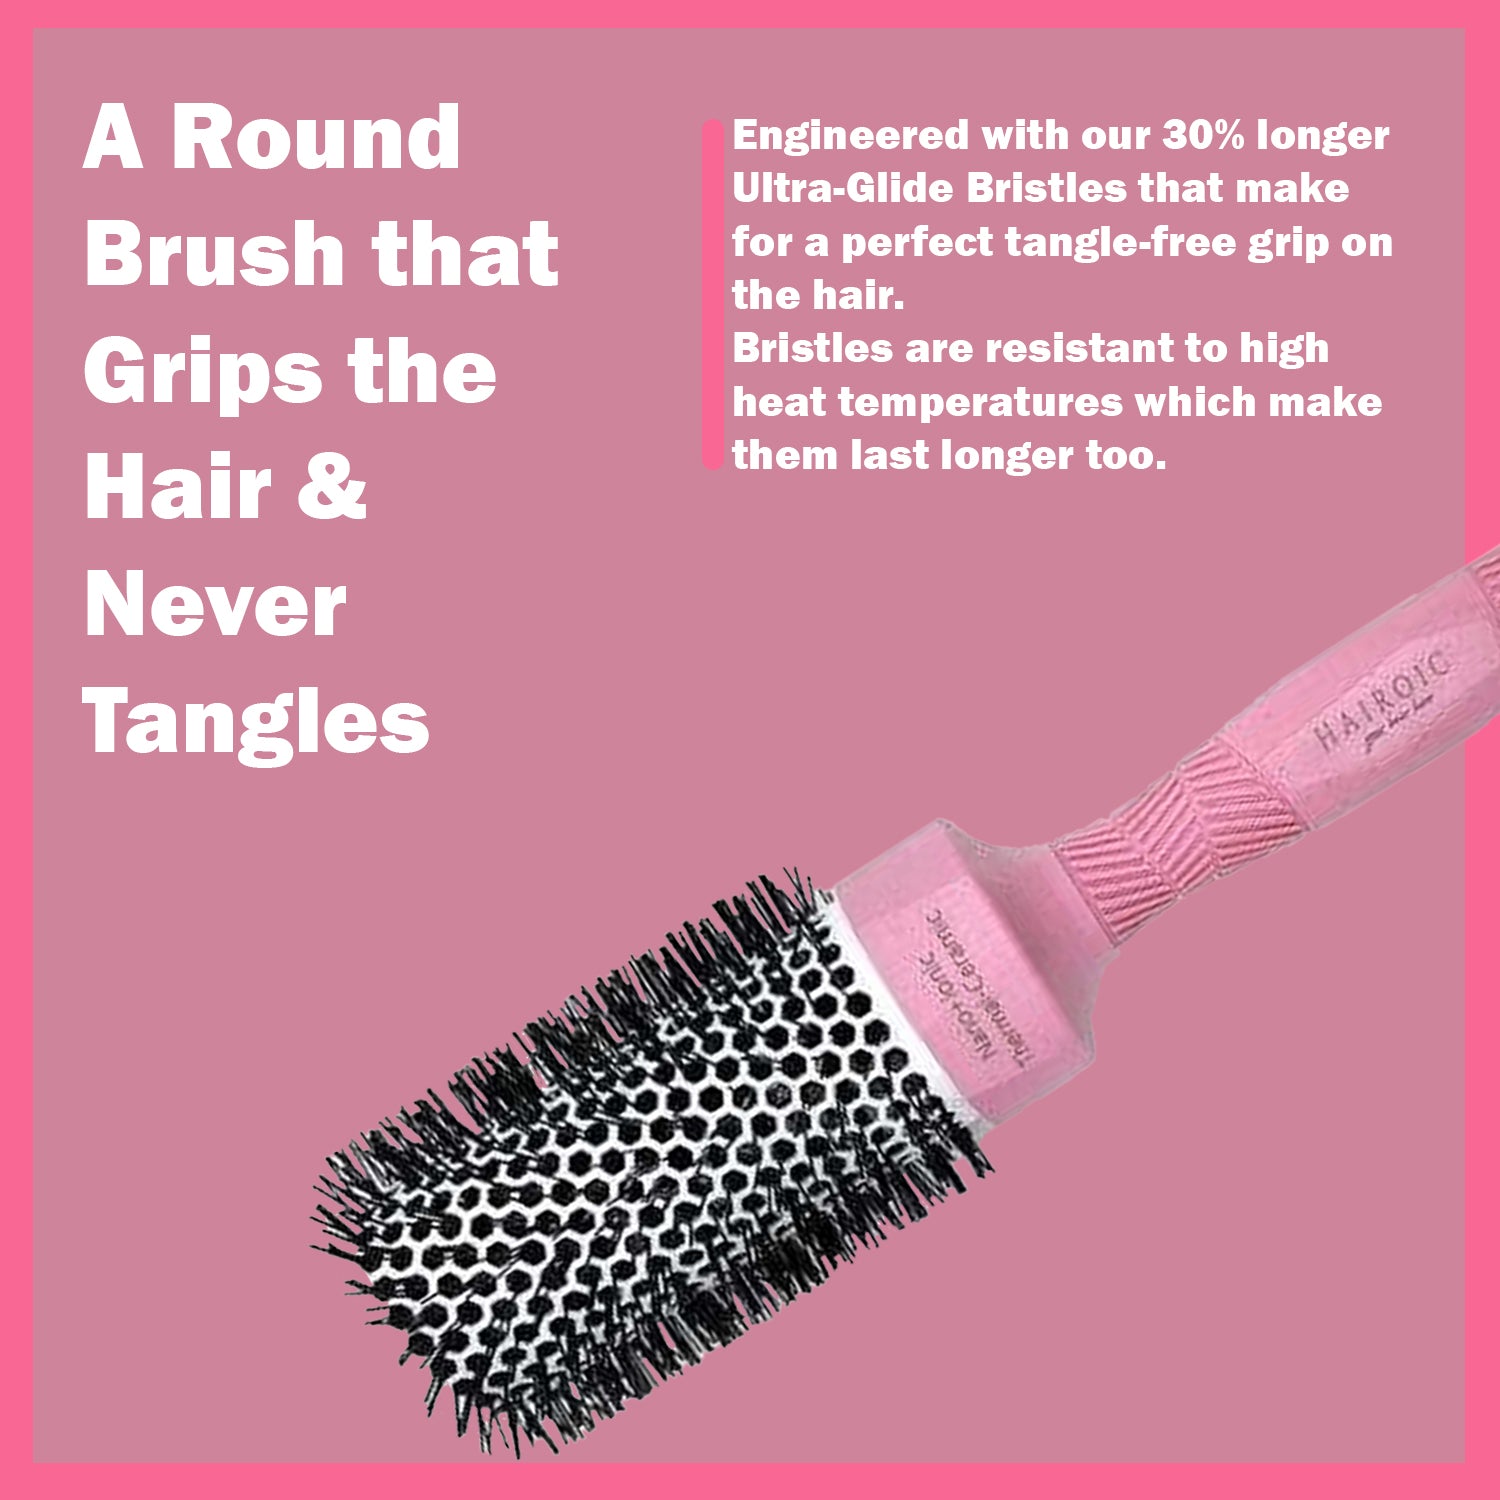 Brilliance New York HAIROIC Blowout Round Barrel Hair Brushes Gift Set For All Hair Types(3 Brushes,Pink) - Brilliance New York Online